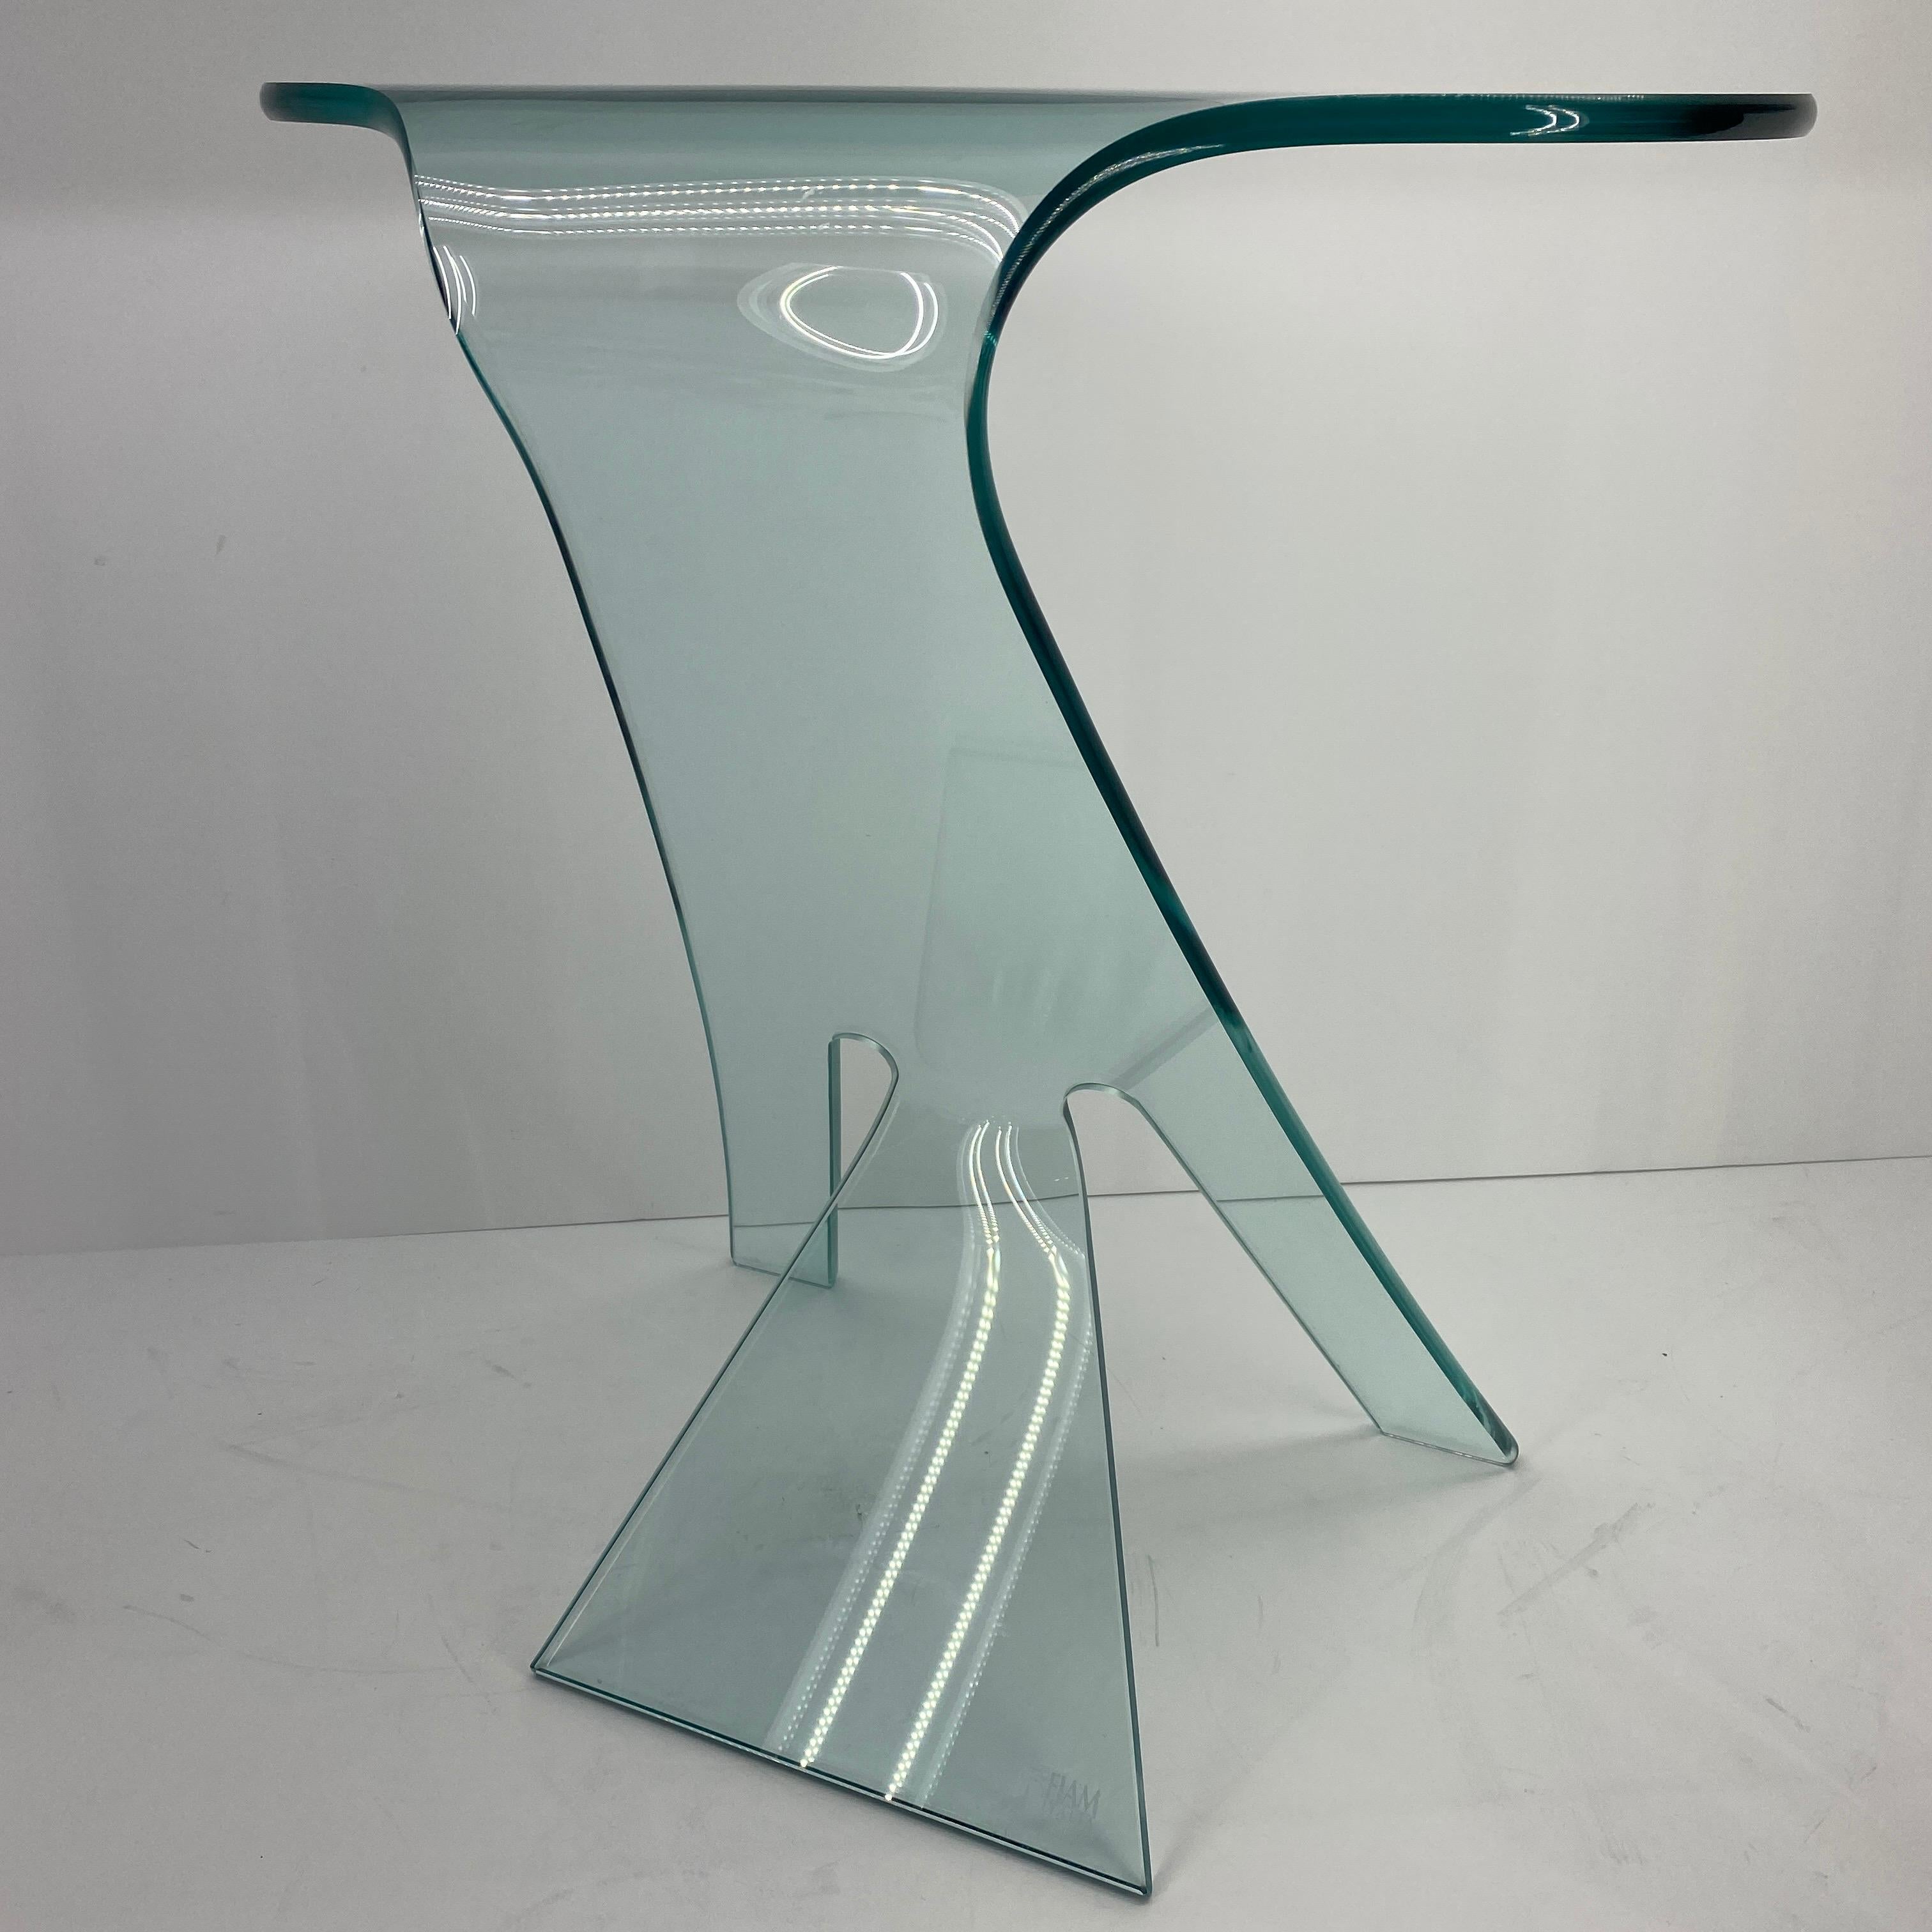 Hand-Crafted Modern Side Table Designed by Vittorio Livi For FIAM Italy